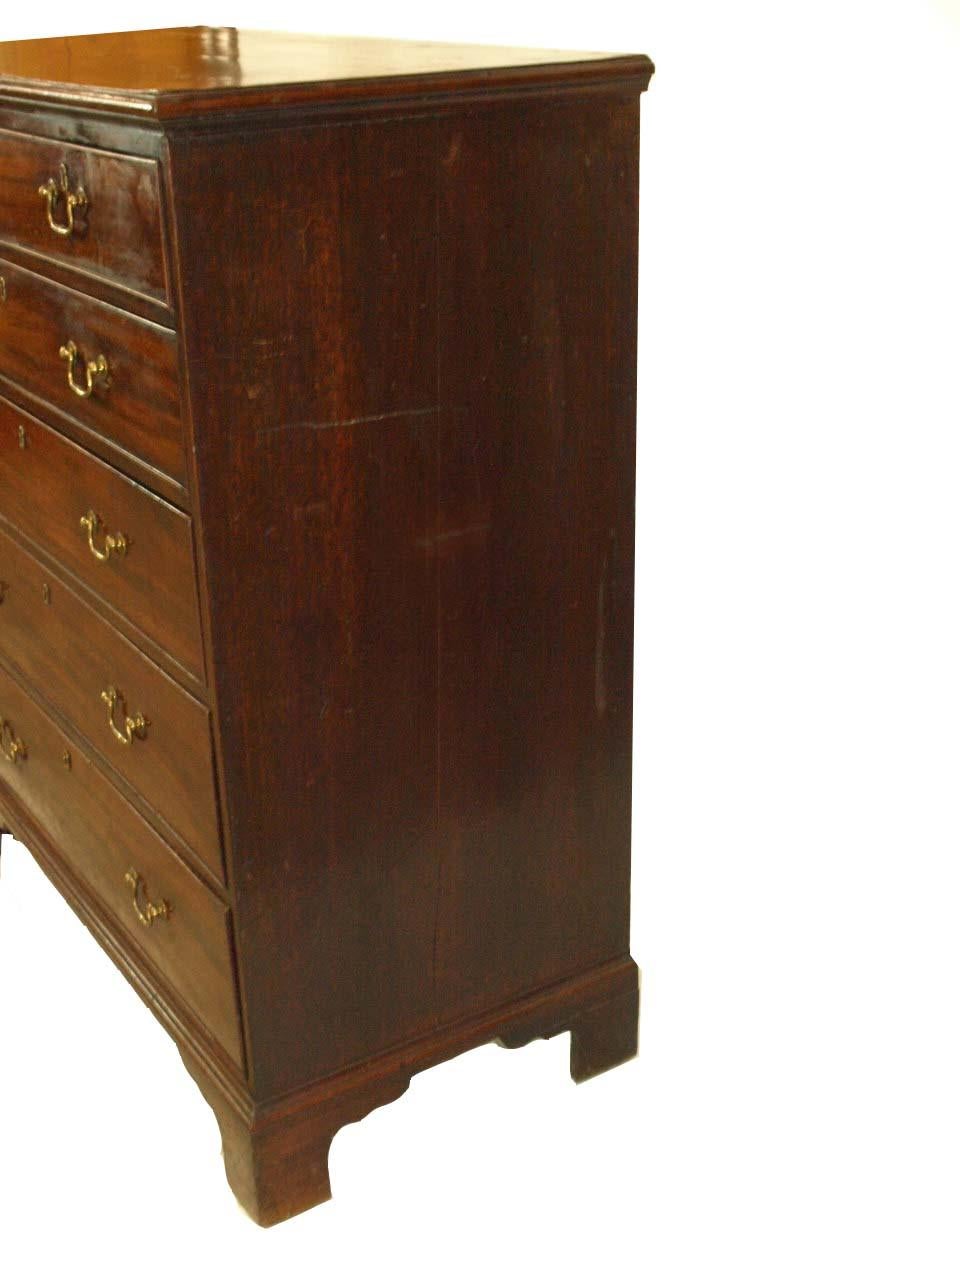 18th Century English Chippendale Tall Chest In Good Condition For Sale In Wilson, NC